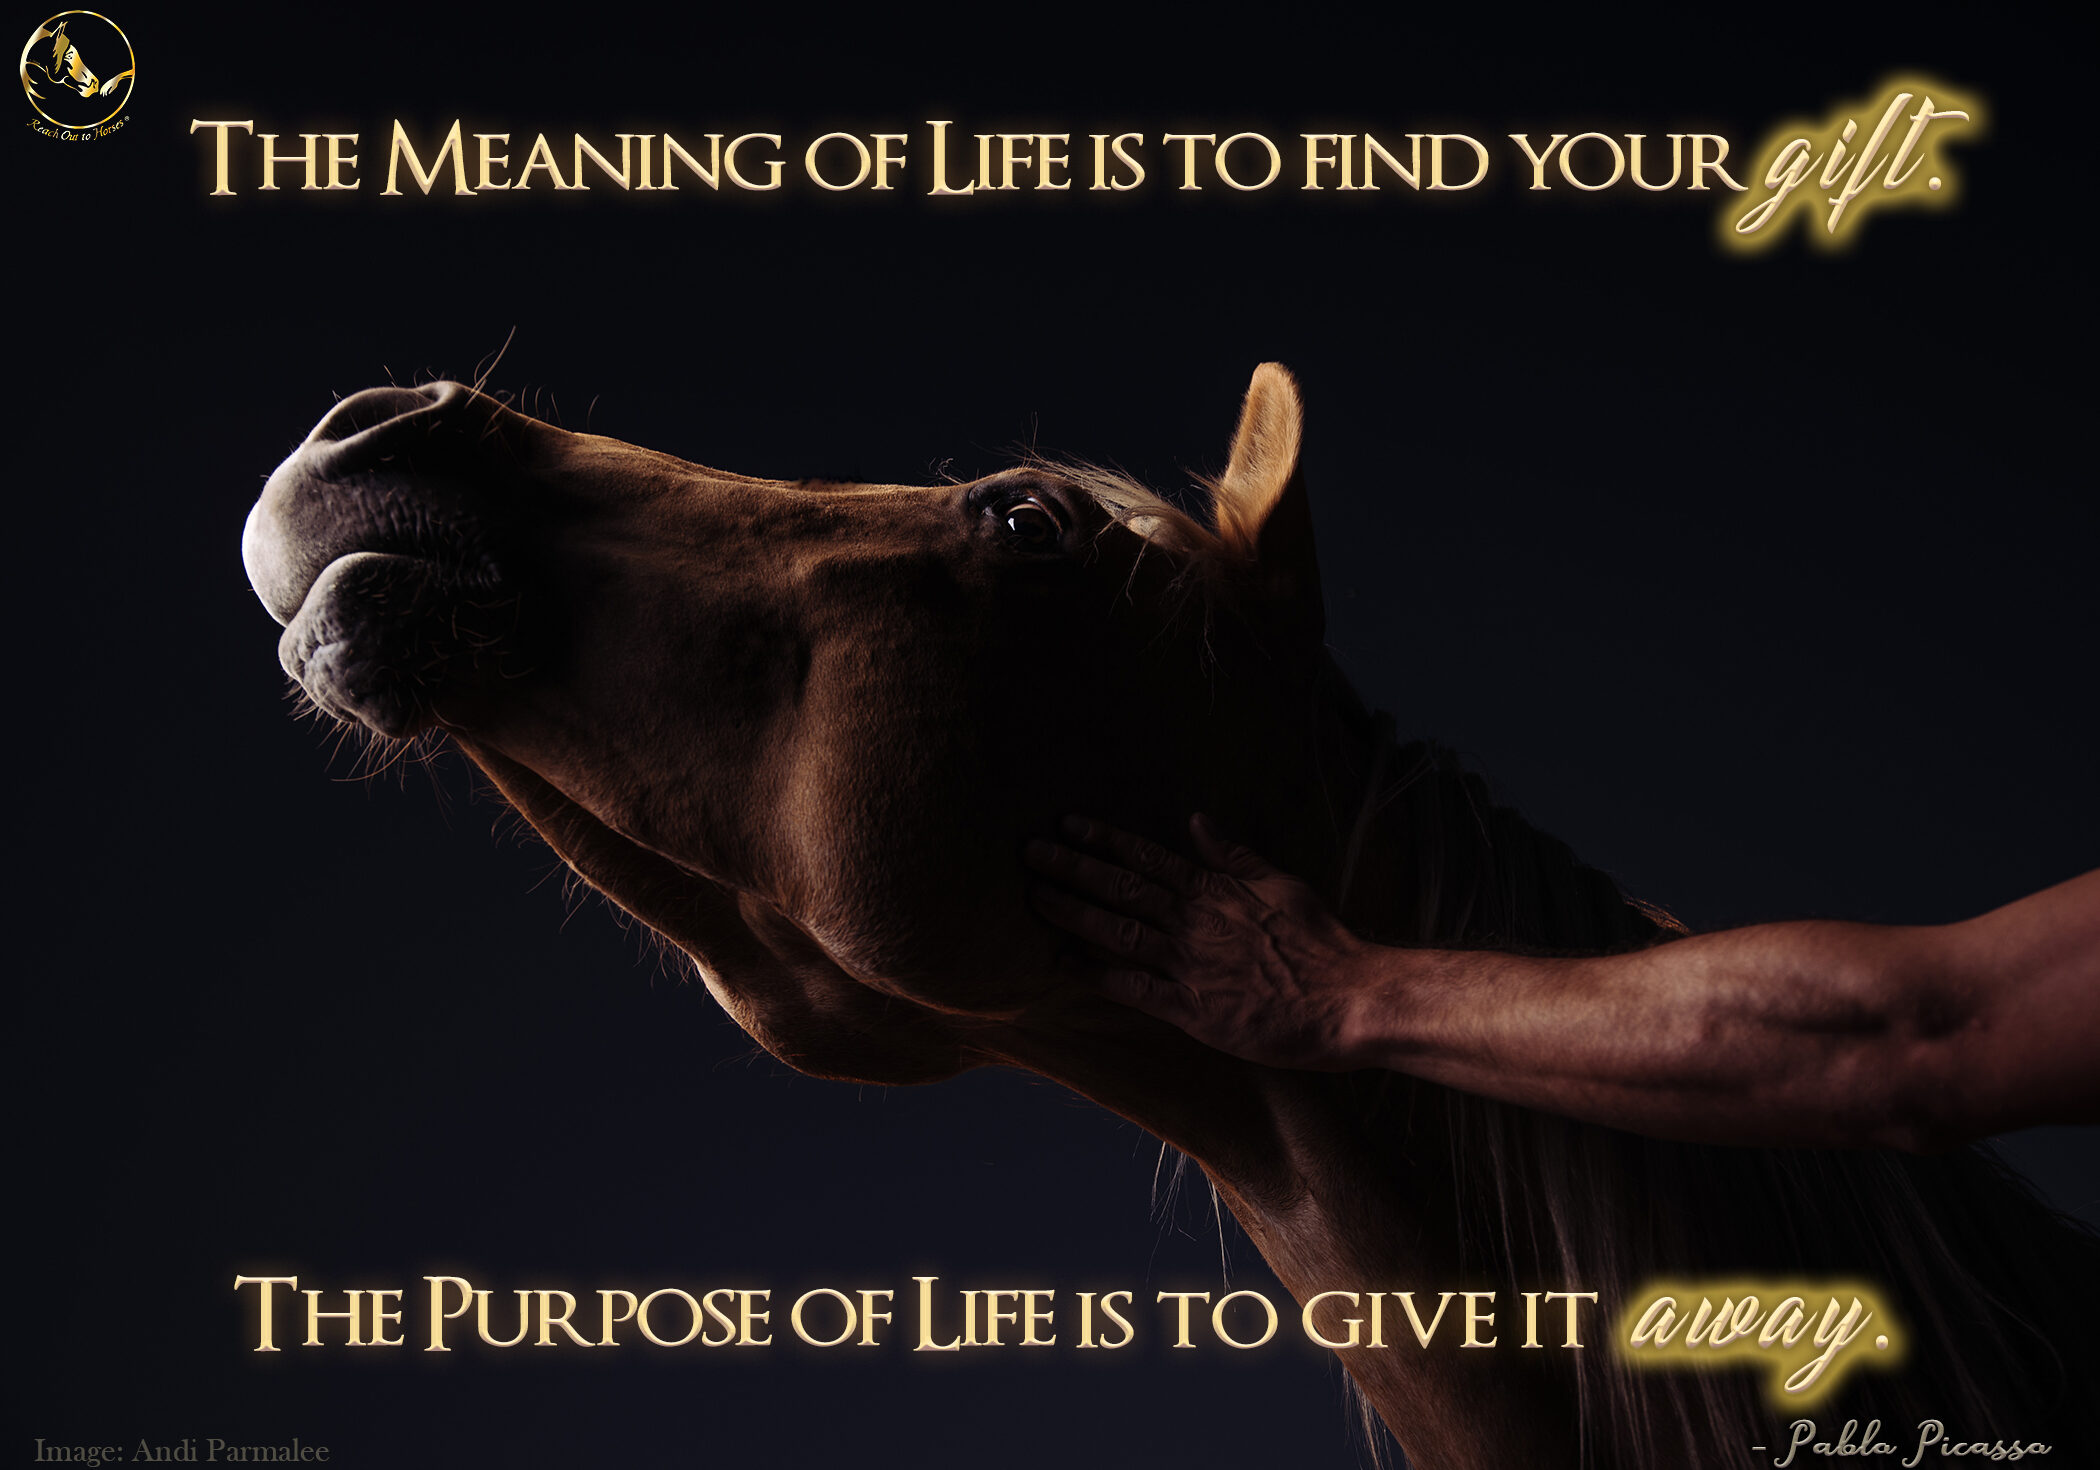 The Meaning of Life is to Find Your Gift. The Purpose of Life is to Give it Away.